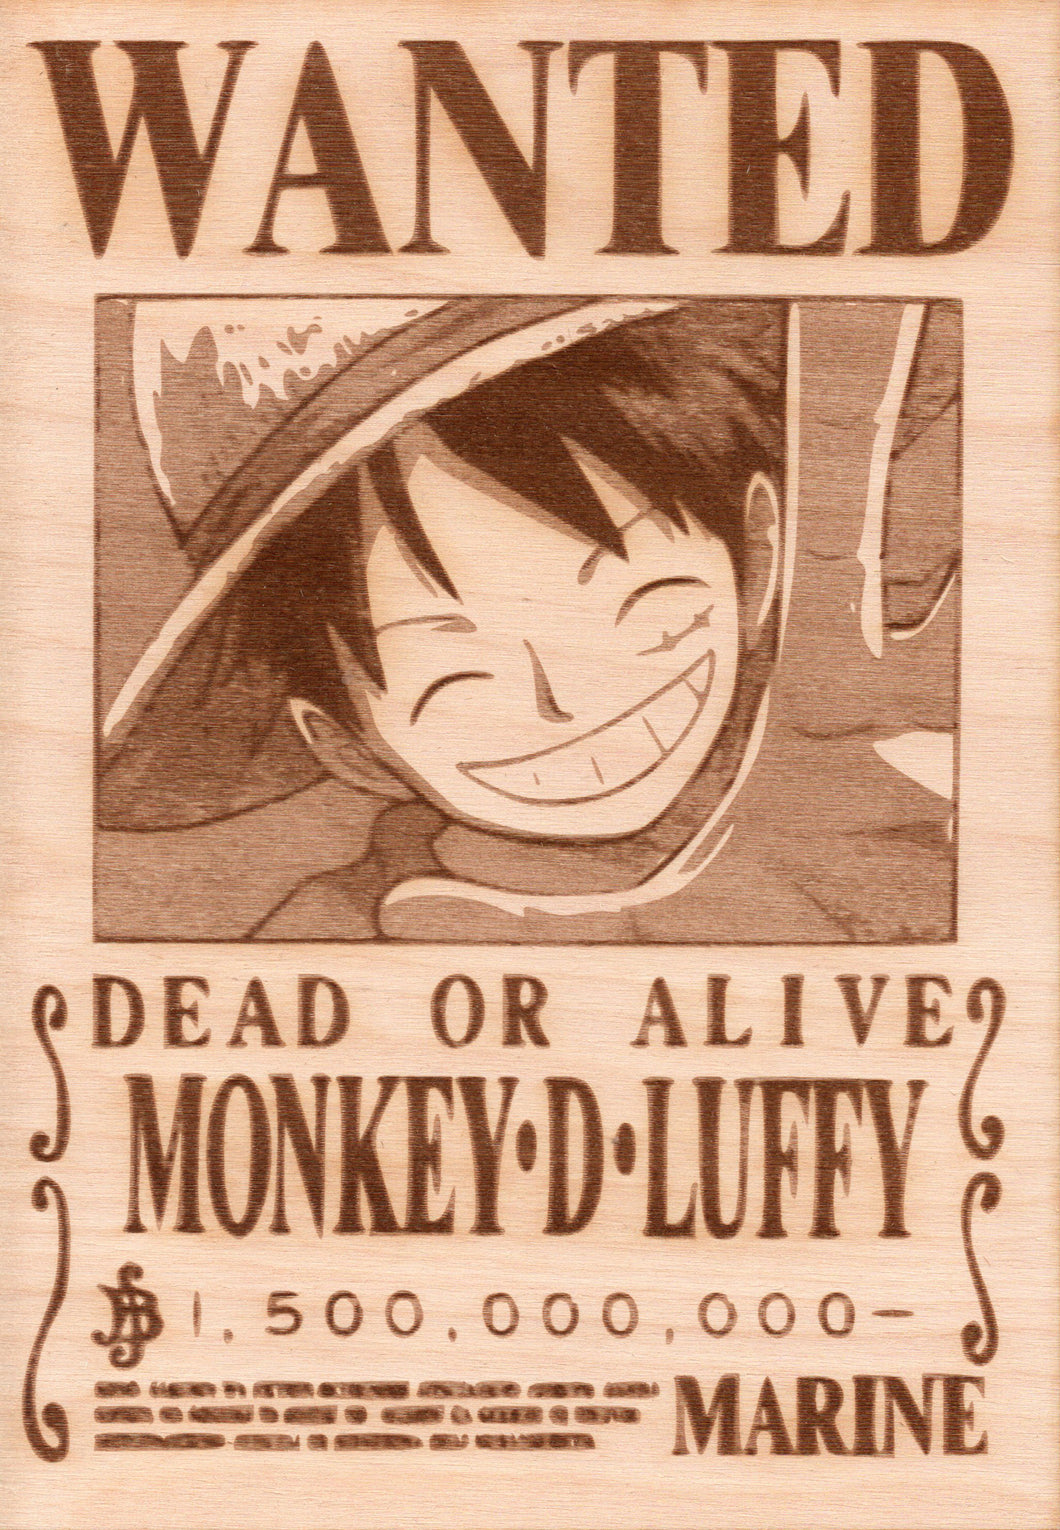 One Piece - Luffy Wooden Wanted Poster - TantrumCollectibles.com